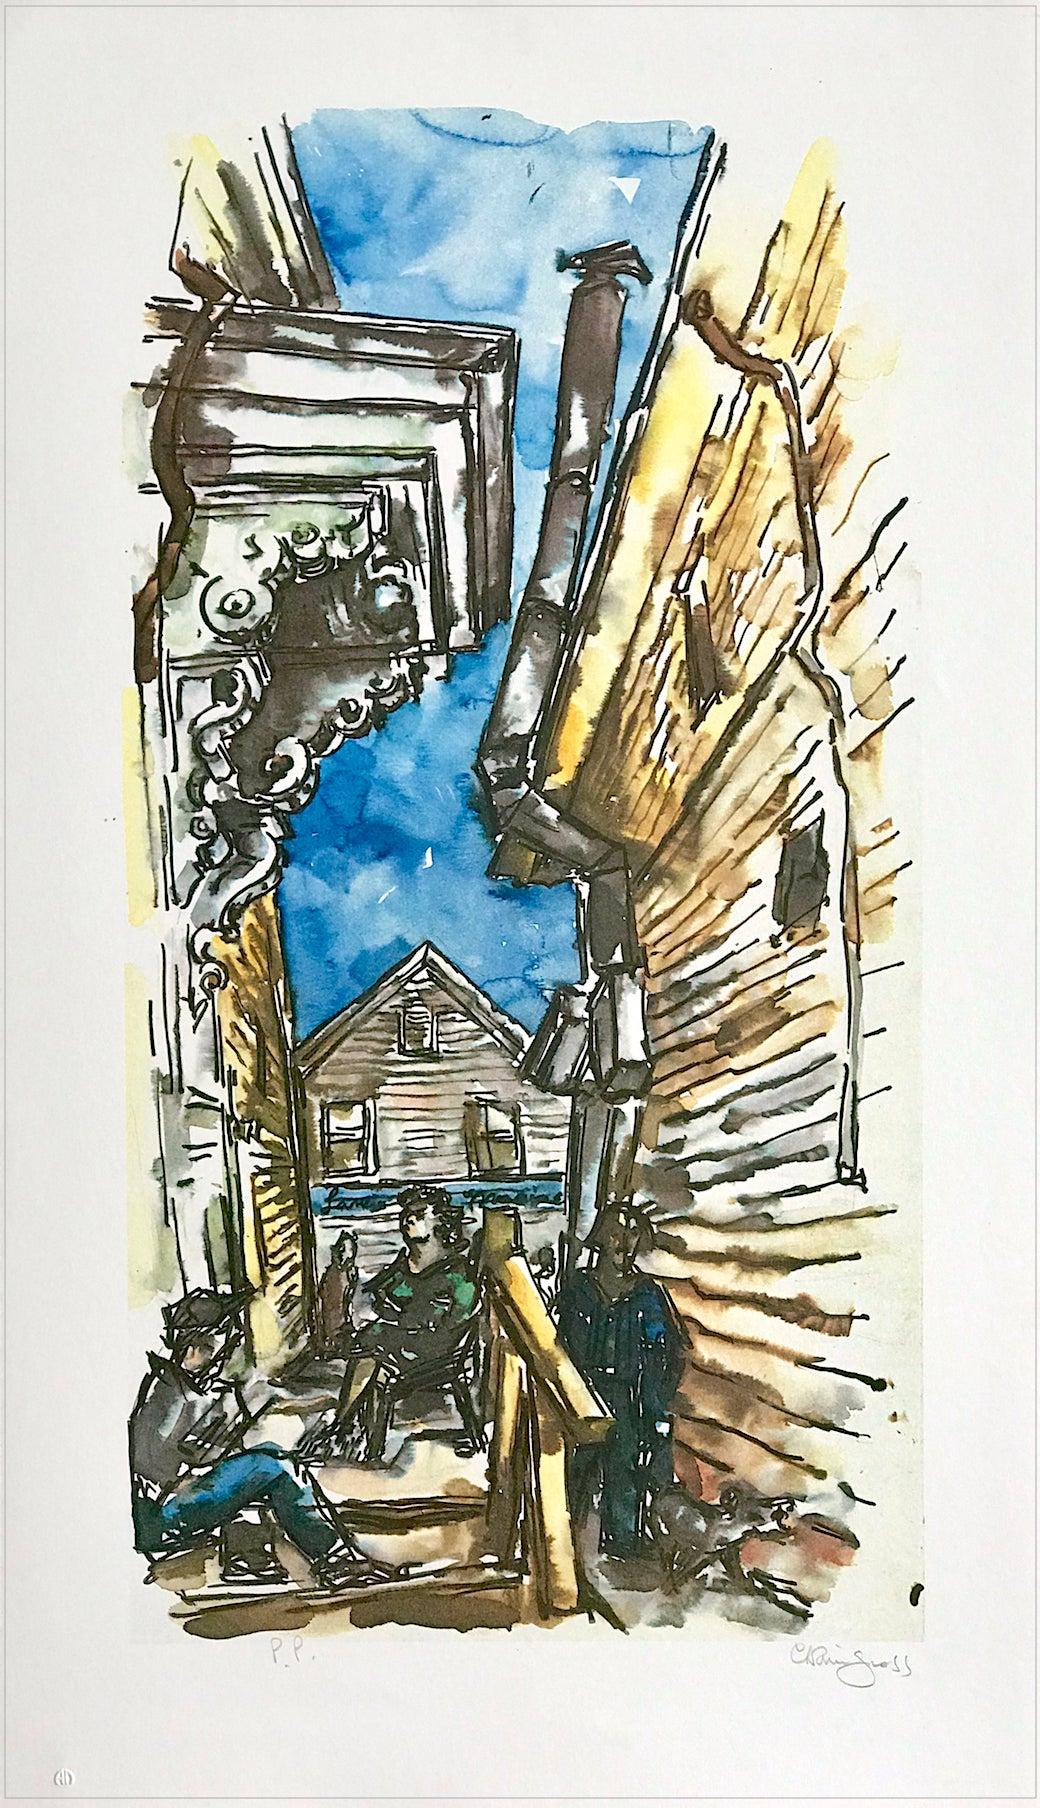 Chaim Gross Landscape Print - PROVINCETOWN SIDE STREET Signed Lithograph, New England Cape Cod White Clapboard